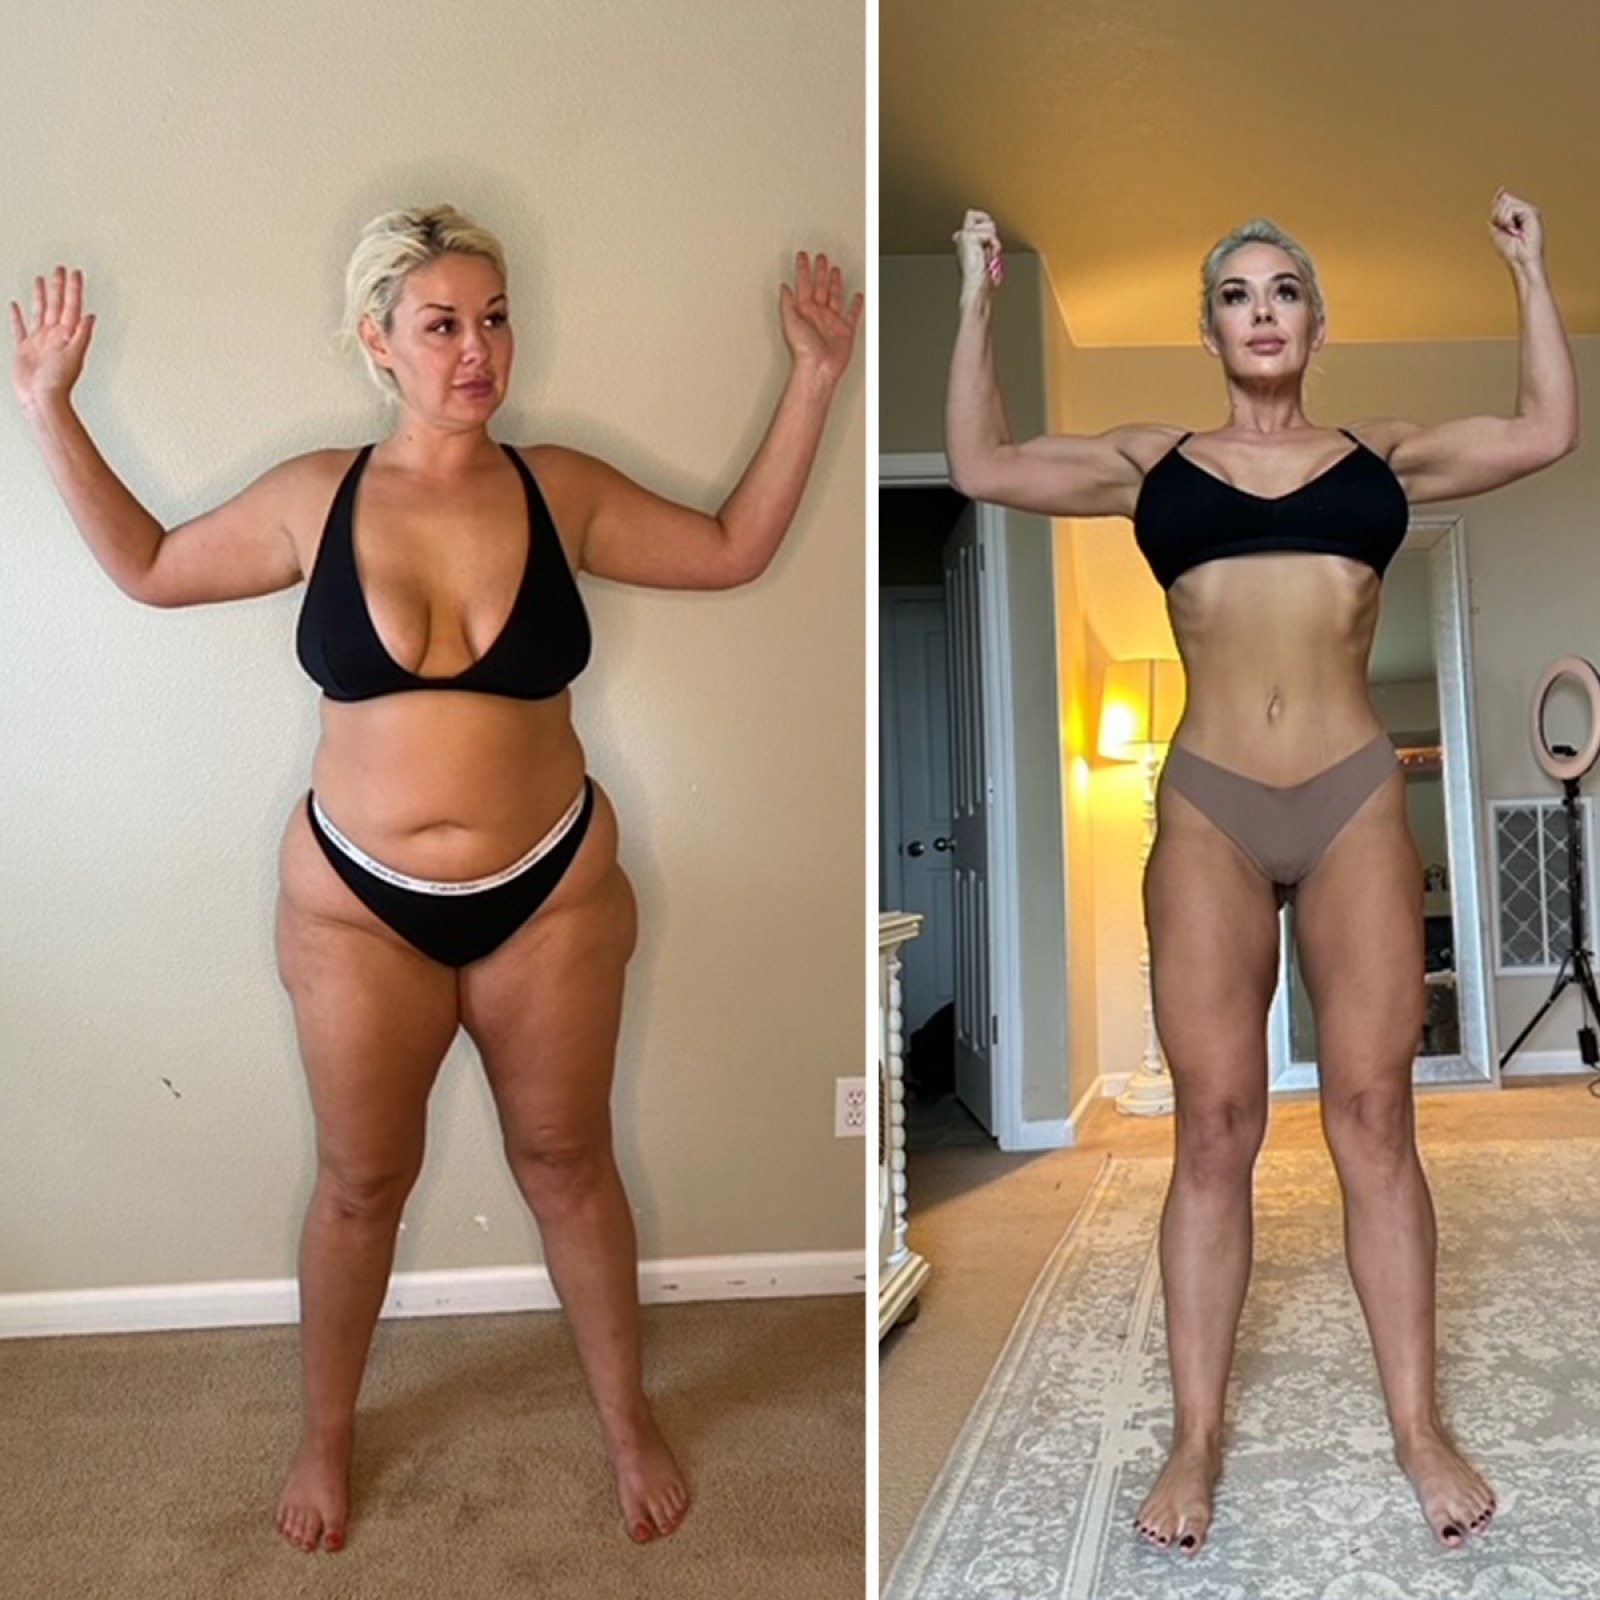 Woman Reveals How She Lost 80lbs In 8 Months While Eating Favorite